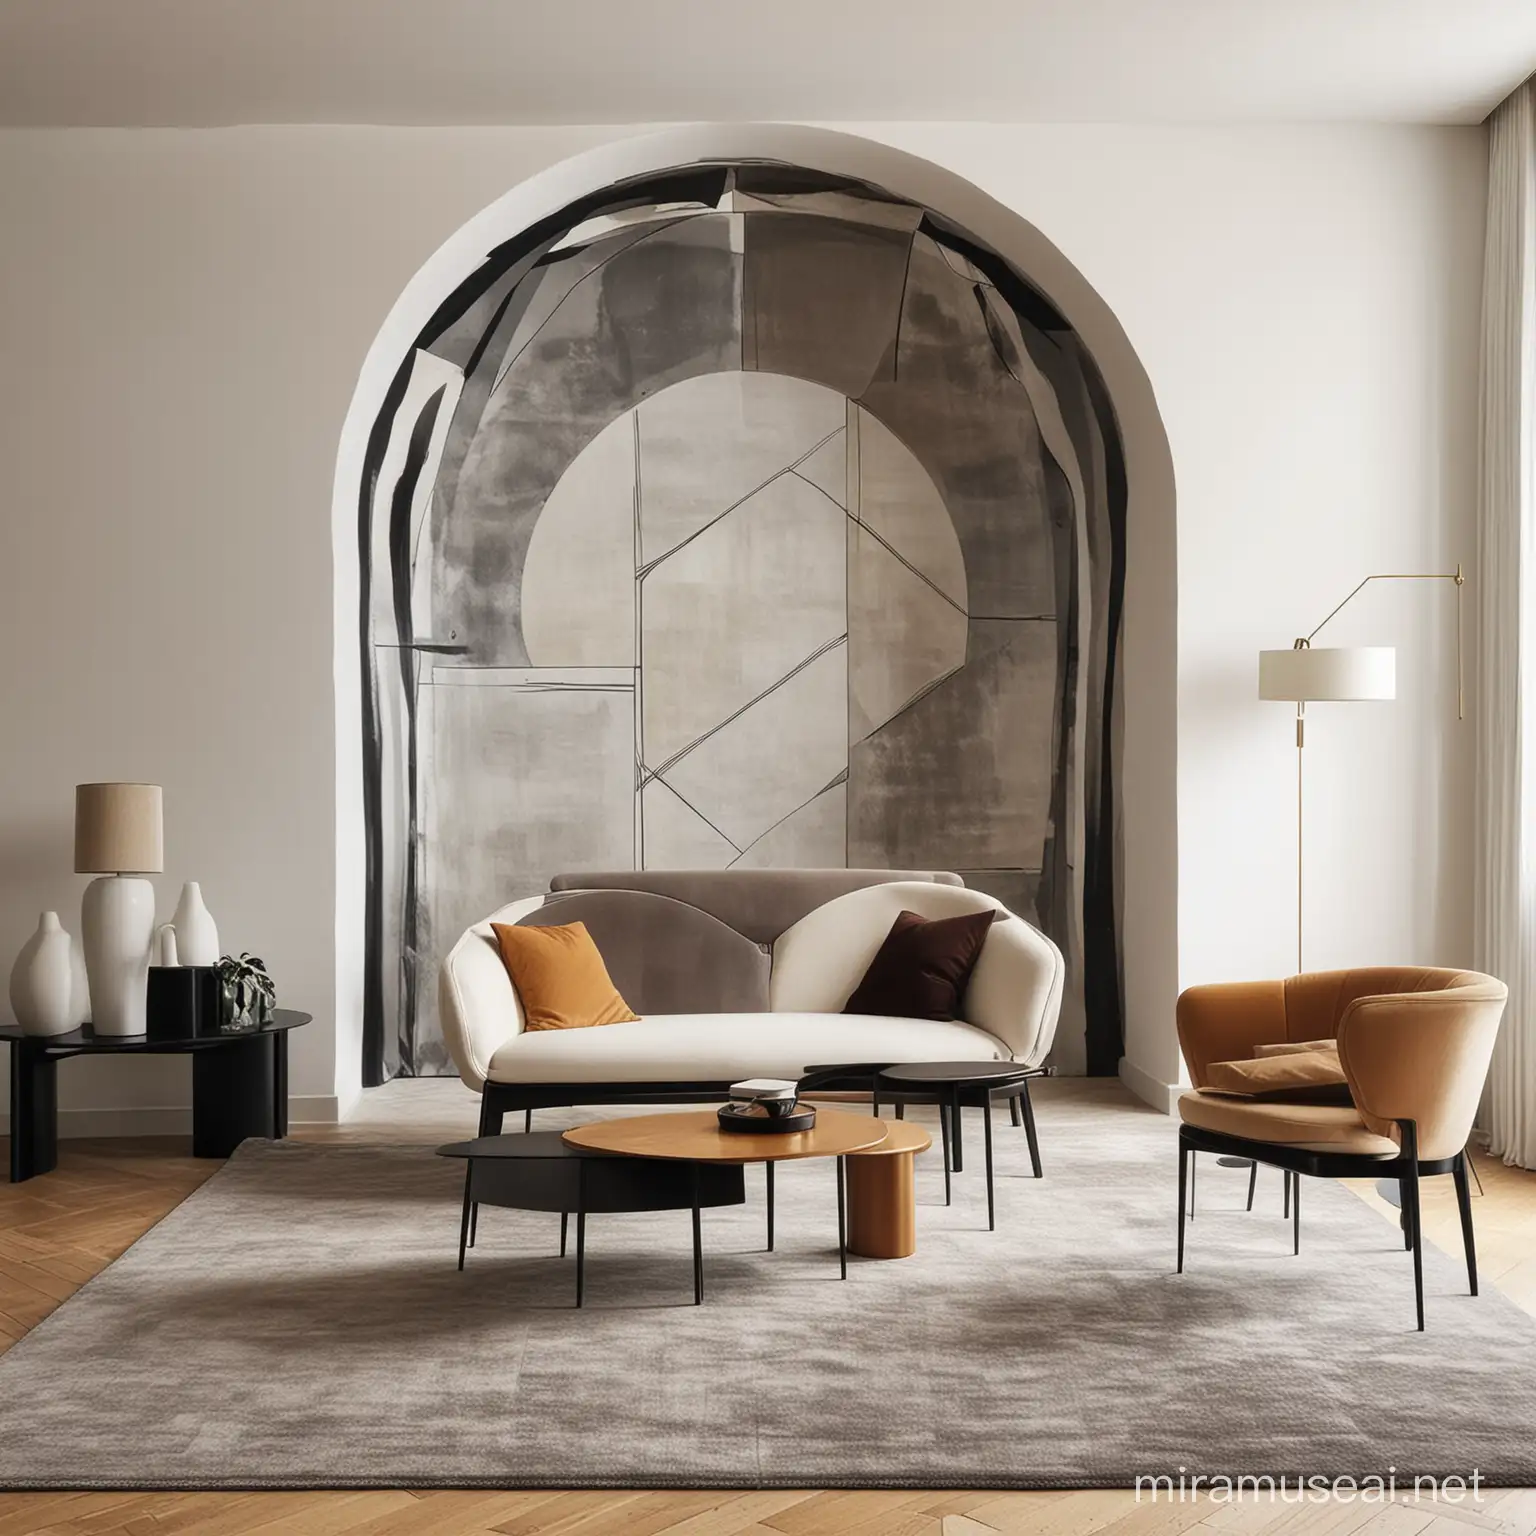 #geometric artwork #arch #interiores #ad #germanystyle
#pierrejeanneret #charlotteperriand
#dianaghan#zahahadid#gubiofficial
#paulinpaulinpaulin #cctapis #atelierfevrier
#lecorbusier #archlovers #architecturedesigr
#theinvisiblecollection #nycphotographer #nycvibes
#parisvibes #londonvibes #artgallery
#quotesaboutlife #artist #interiordecoration
#cassina #tacchini#fendicasa#cappellini